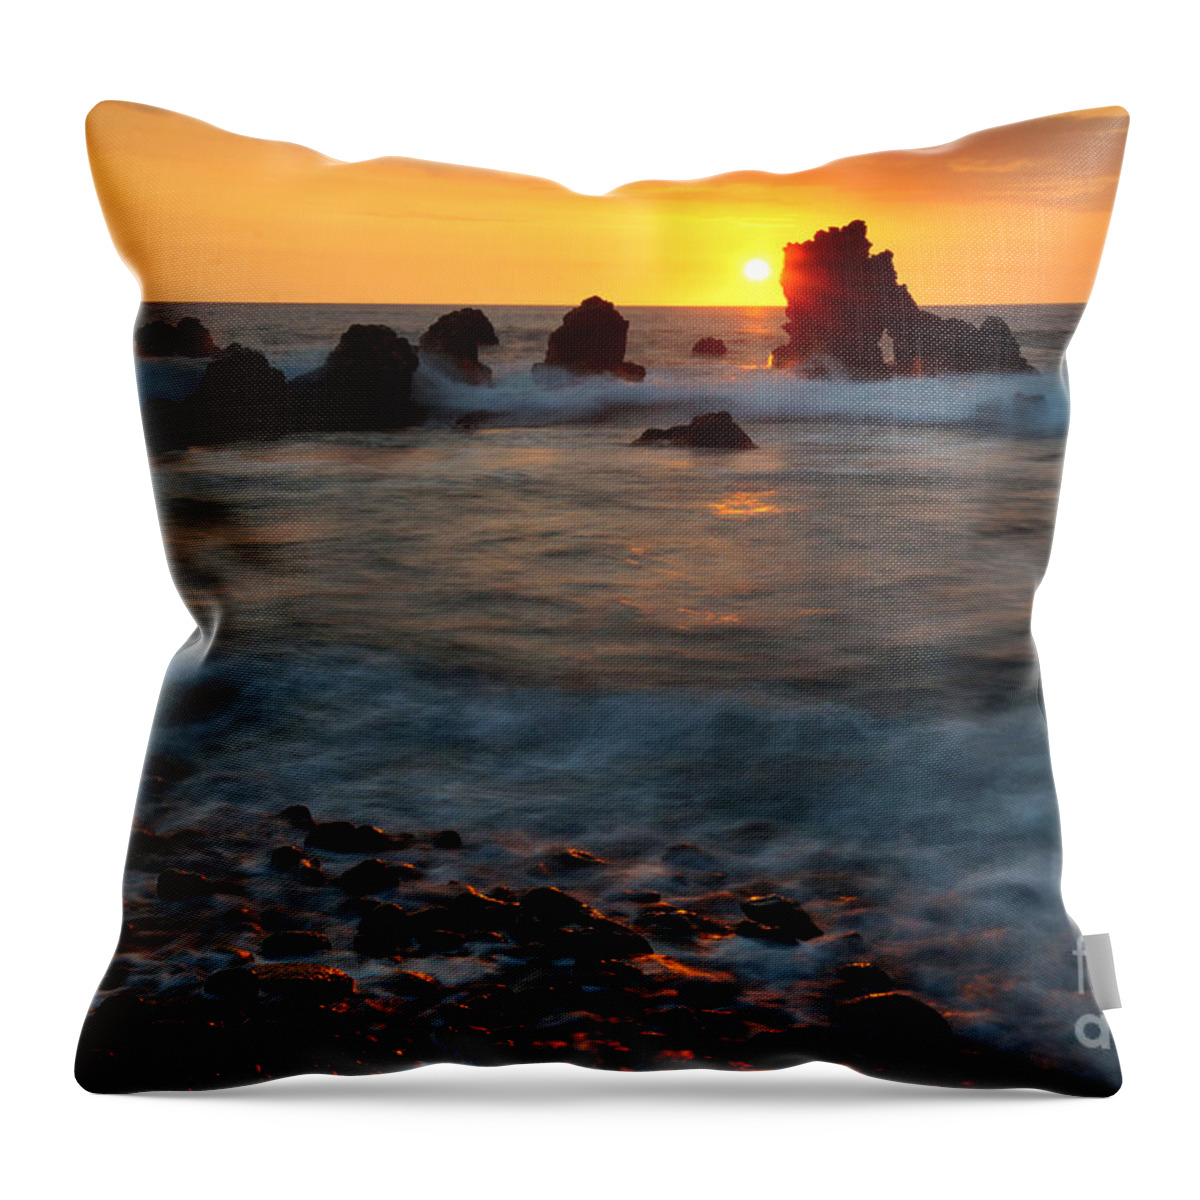 Lava Formations Throw Pillow featuring the photograph Lava Coast by Aaron Whittemore